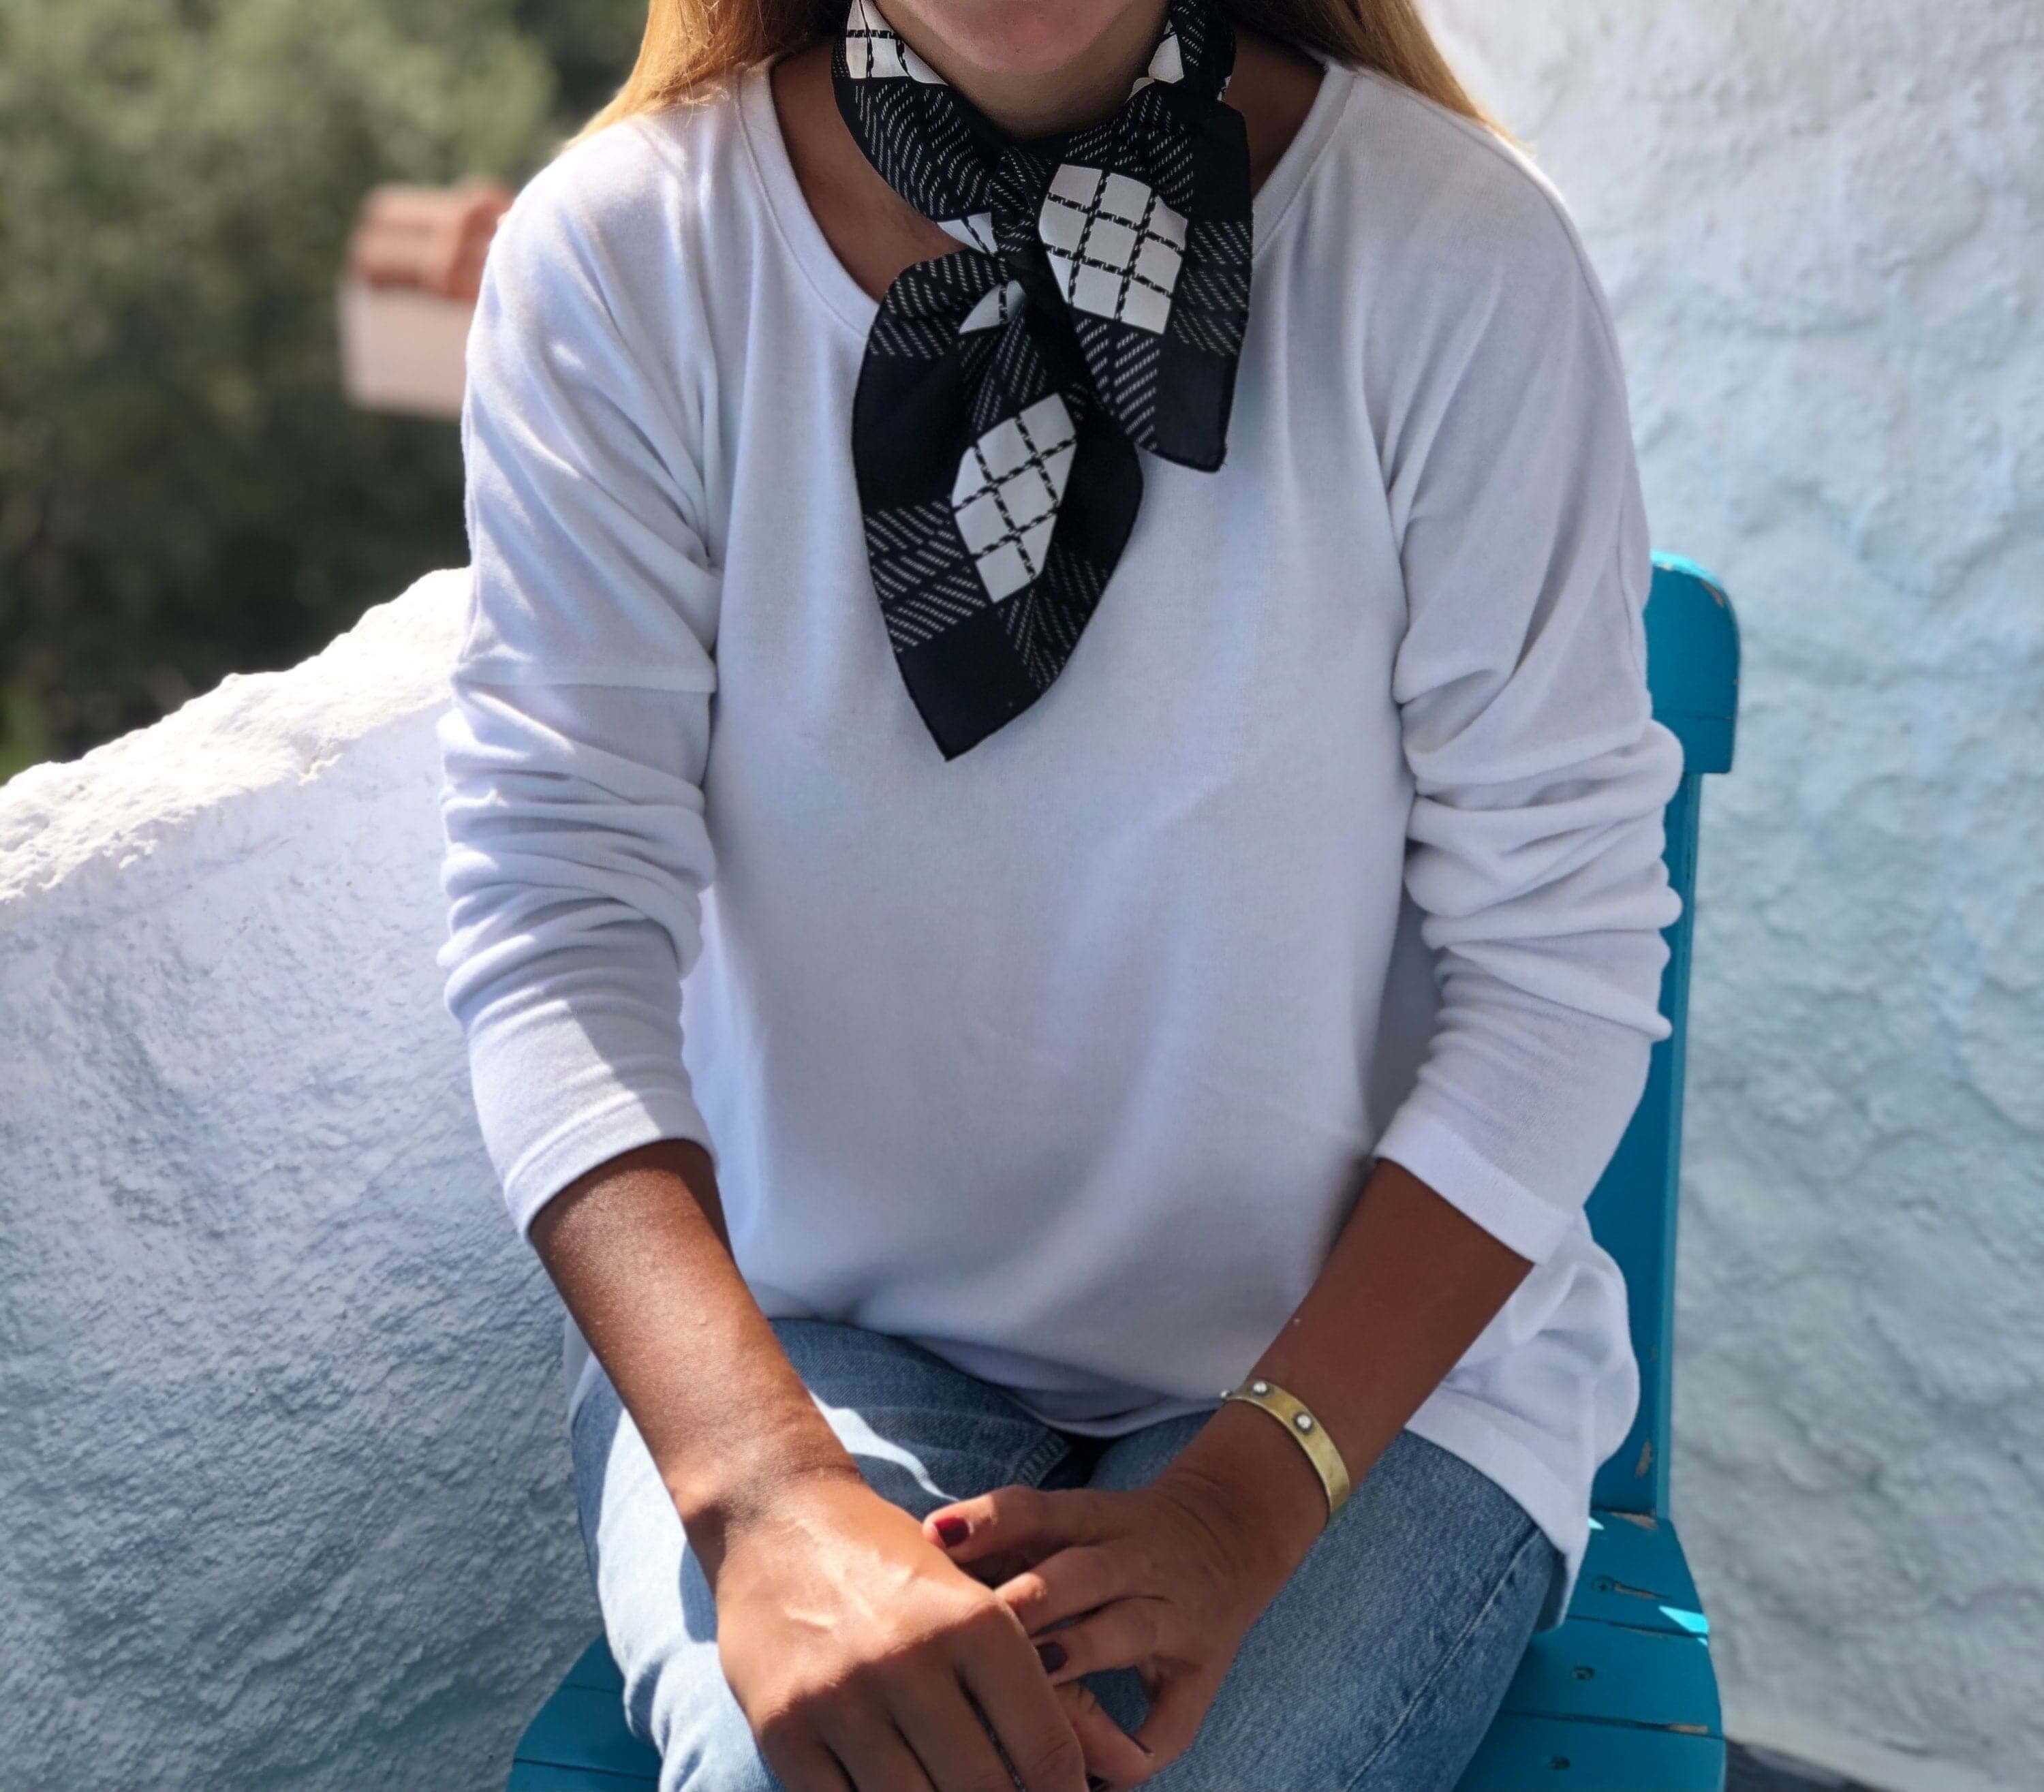 Upgrade your wardrobe with our Square Head Scarf! This versatile piece can be styled in various ways, whether you wear it as a headband, neck scarf or even tied to your purse.